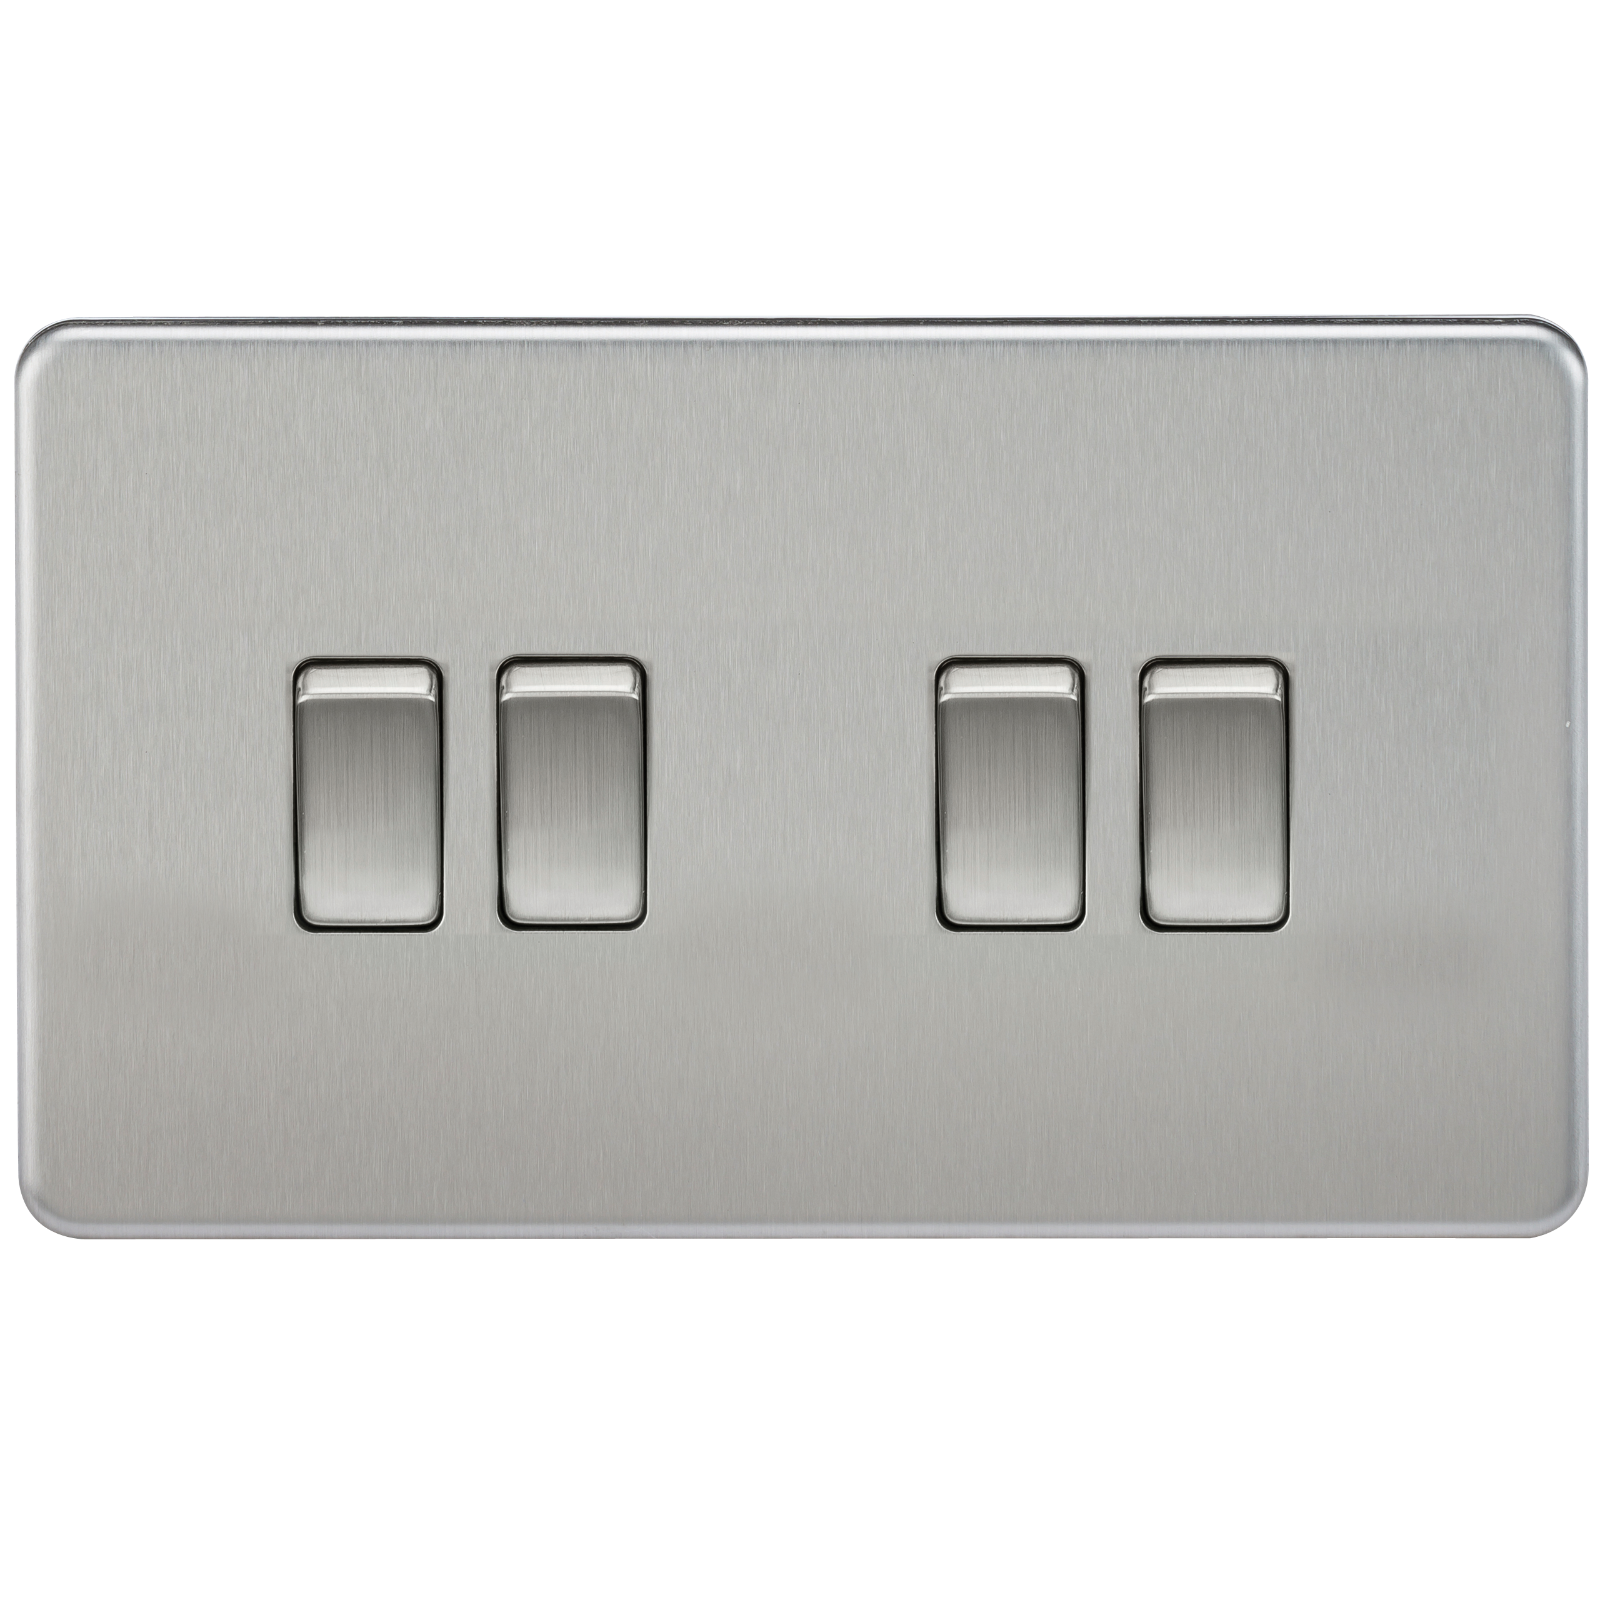 Screwless 10A 4G 2-Way Switch - Brushed Chrome - SF4100BC 